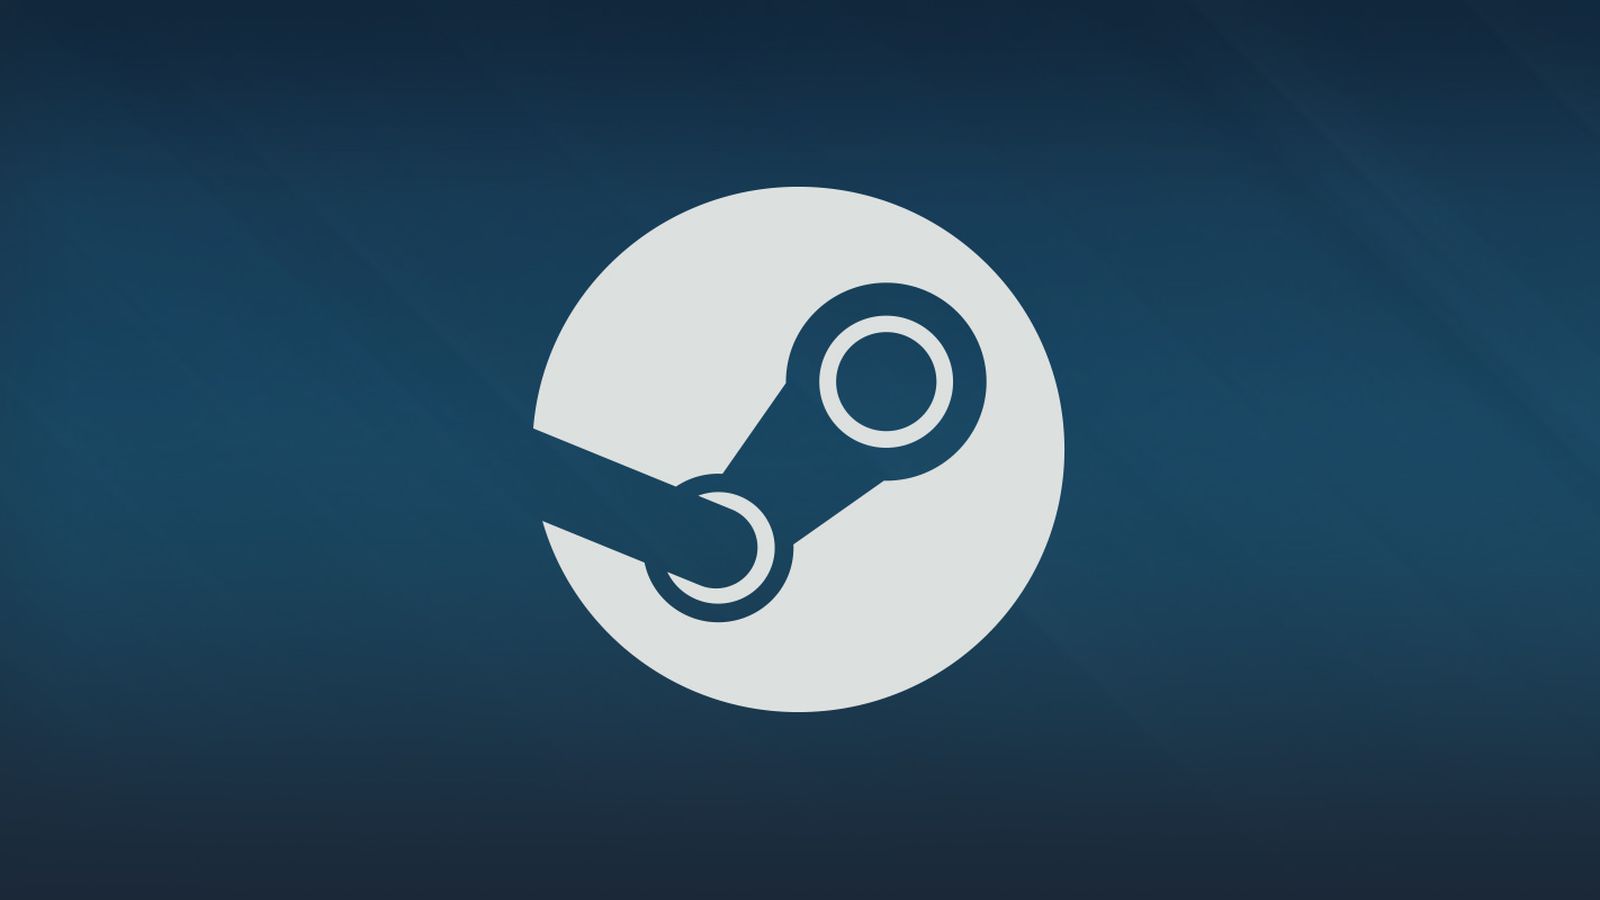 Image for Steam Game Festival rebrands as Steam Next Fest, set to take place in June